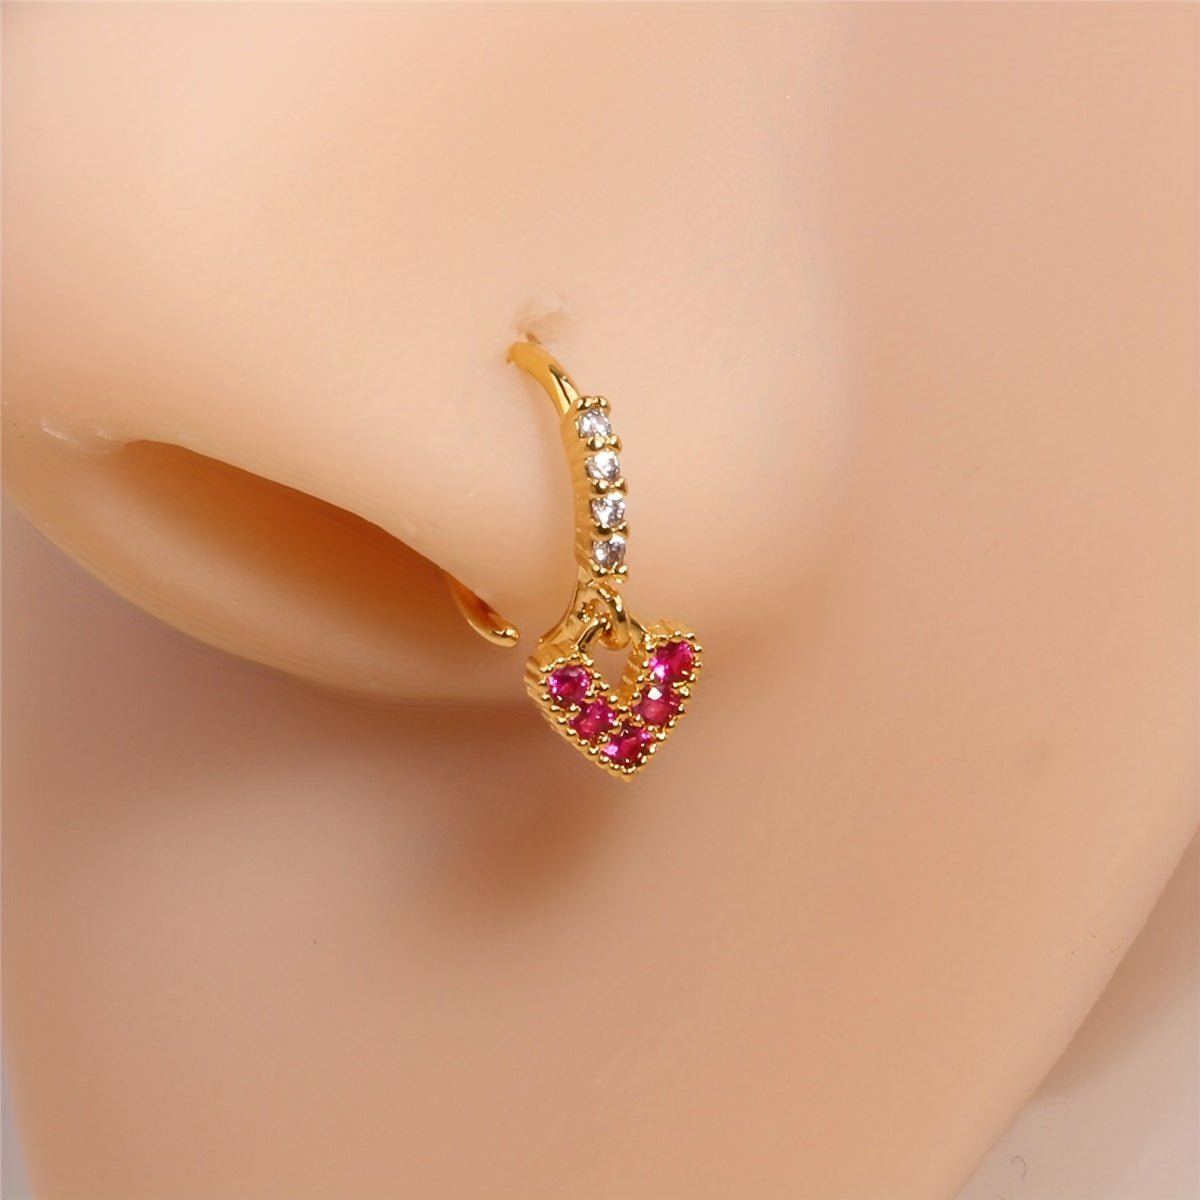 Simple Love Heart Pendant Dangle Nose Ring Inlaid Shiny Zircon Vintage Style Nose Piercing Jewelry